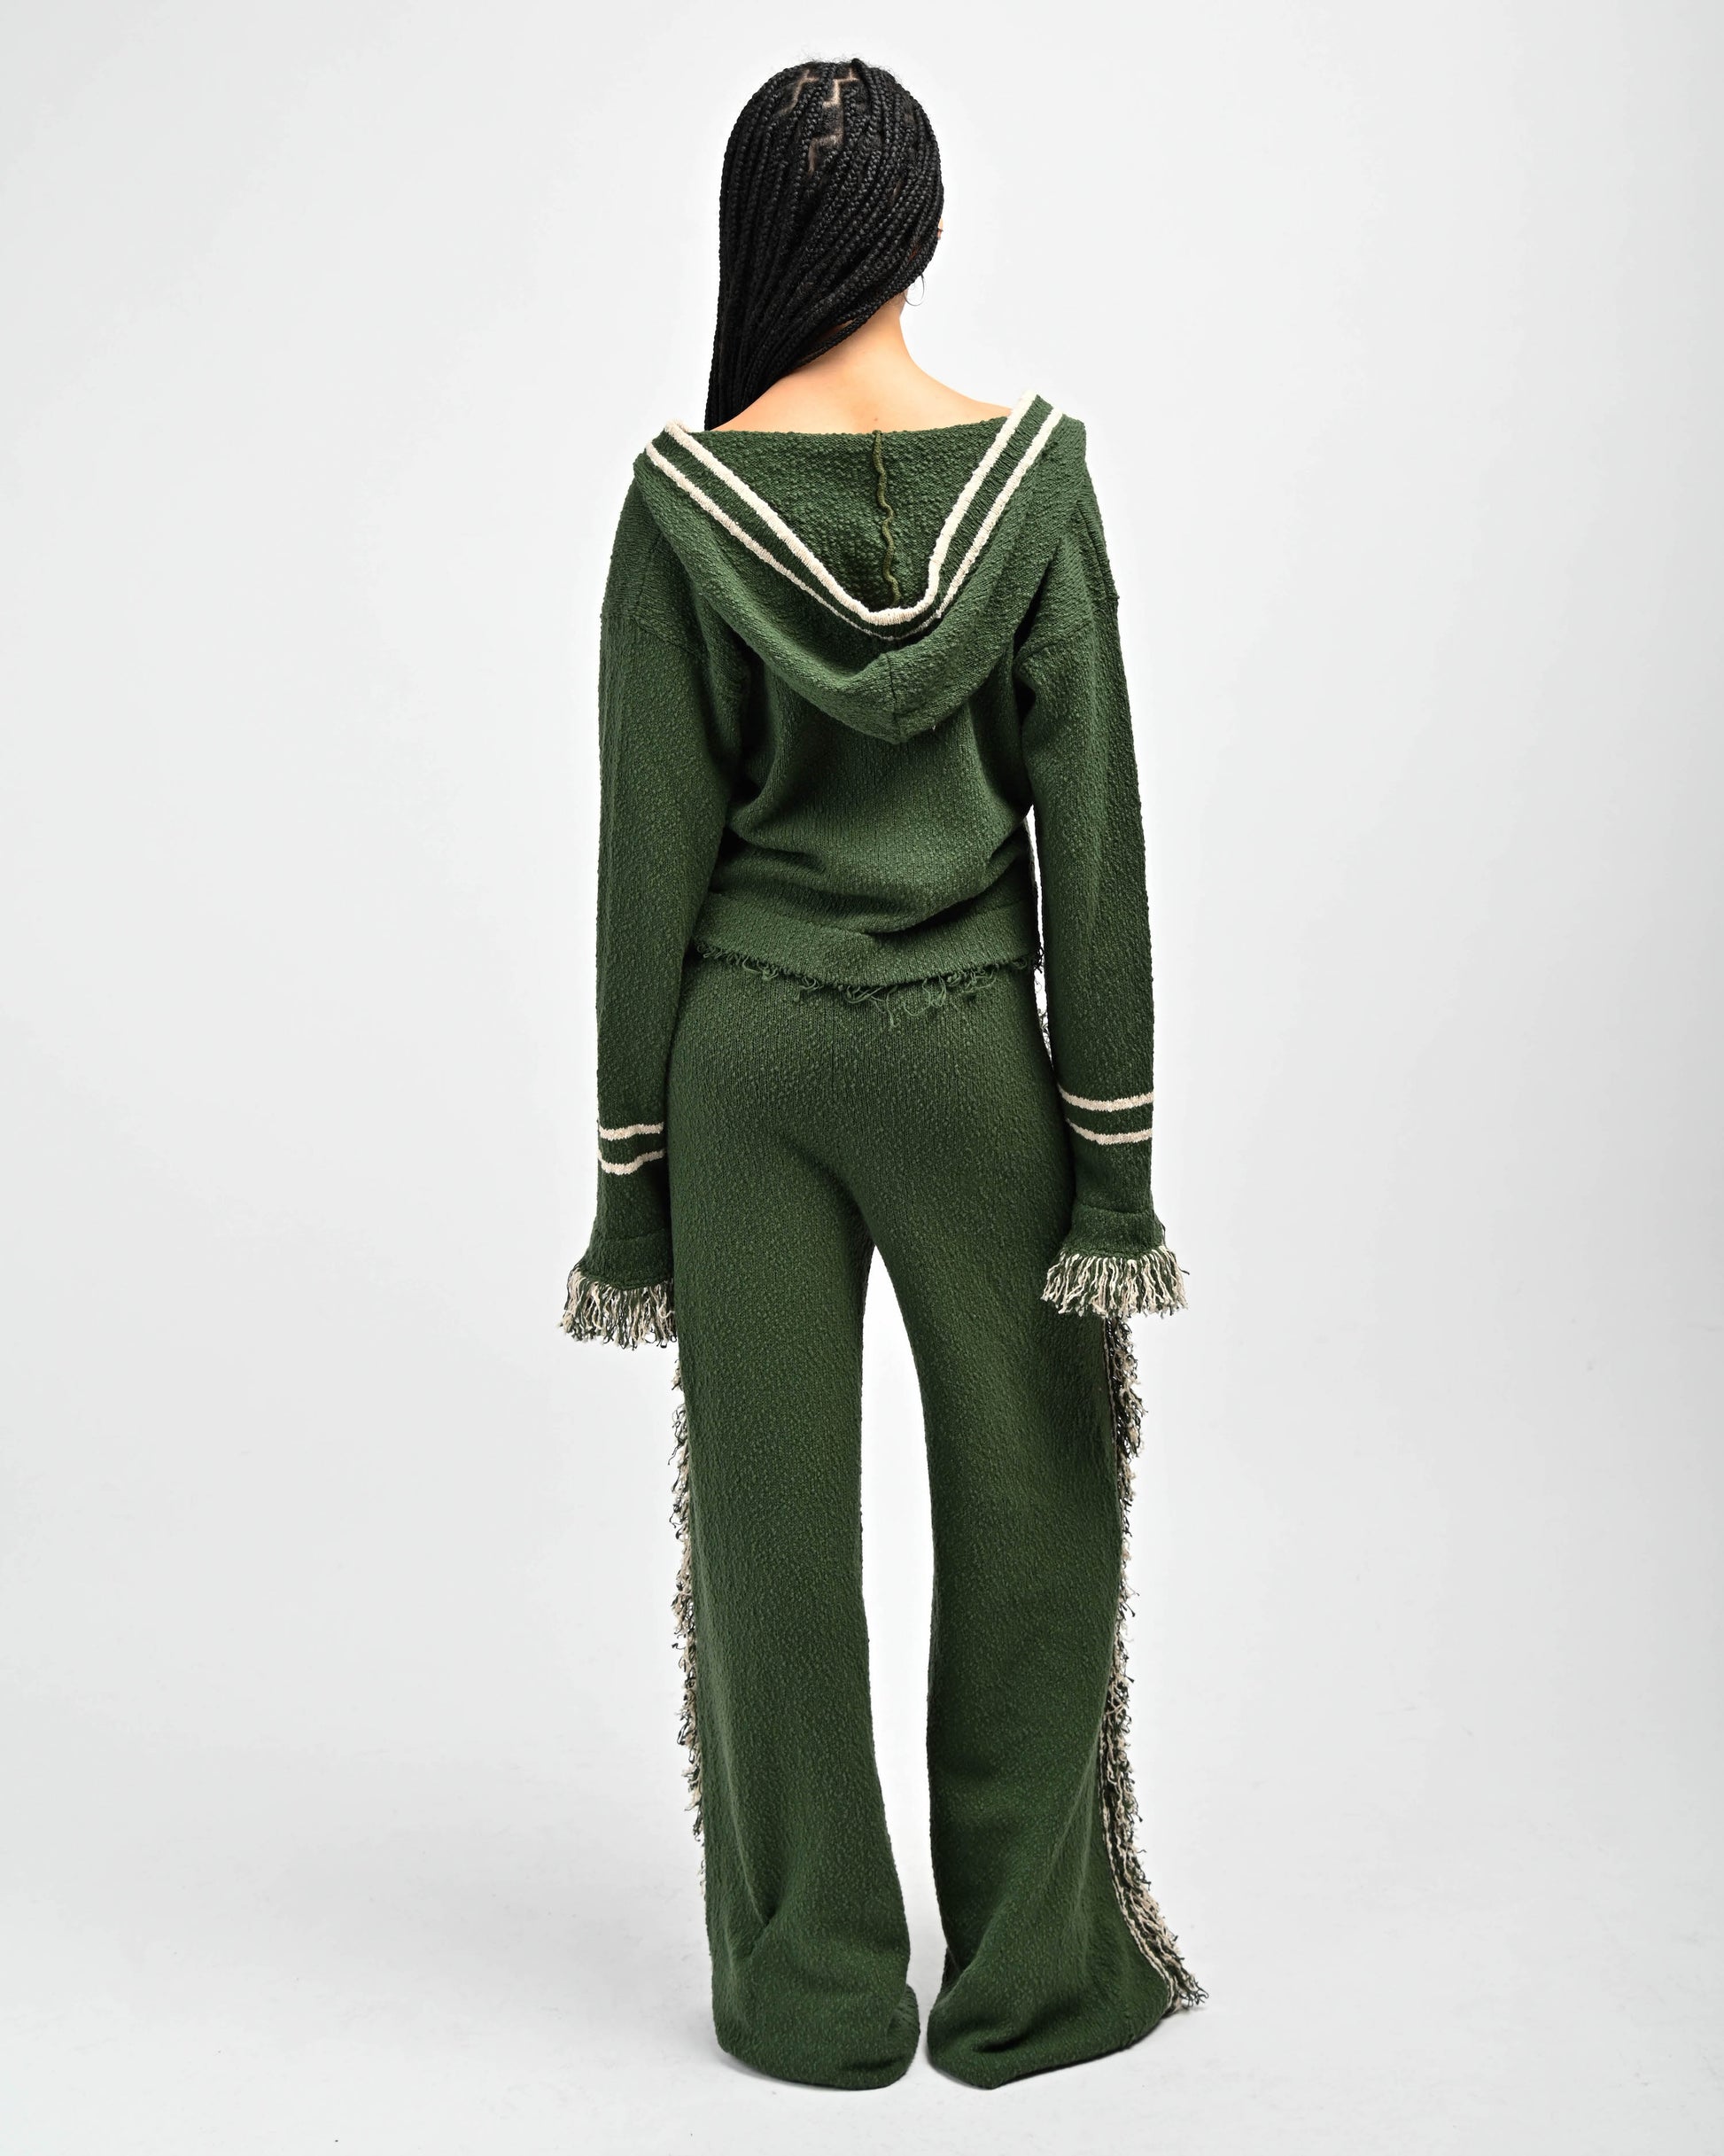 Back View of model wearing Andy Fringe Knit Hoodie and Andy Fringe Knit Pants in Miki Green by Aseye Studio